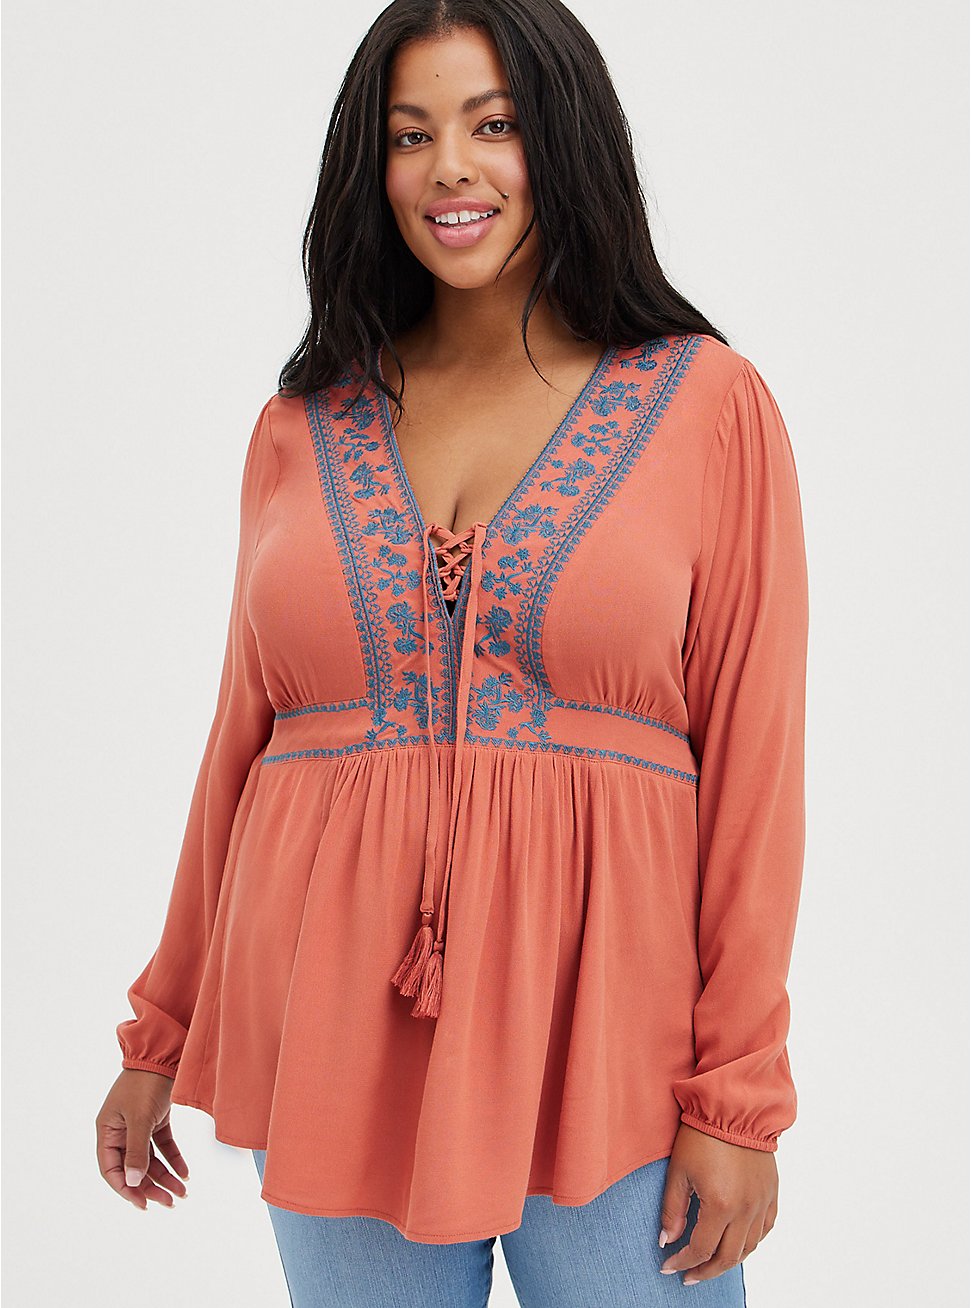 Embroidered Lace Up Babydoll Top - Textured Challis Rust , REDWOOD, hi-res